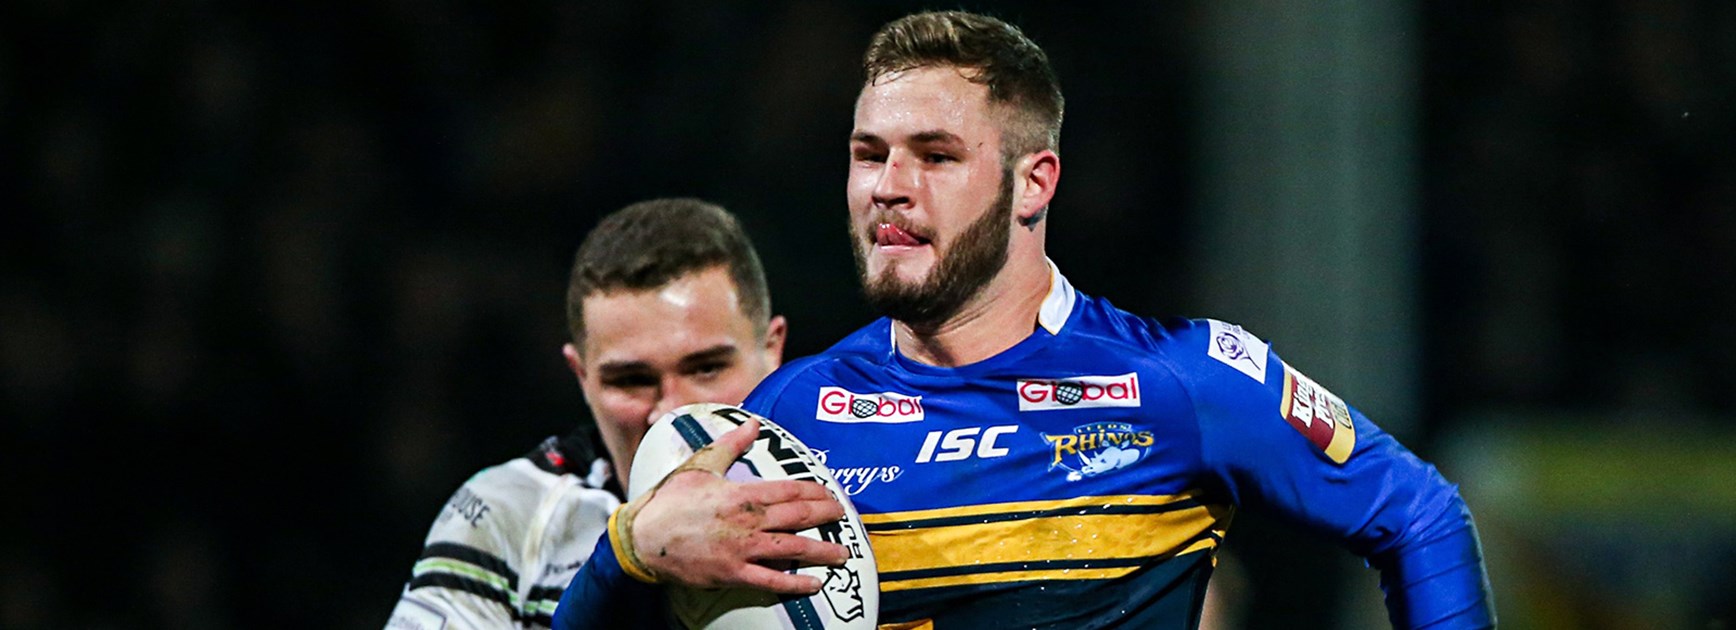 England fullback Zak Hardaker was named the Super League's Man of Steel when playing for Leeds in 2015.